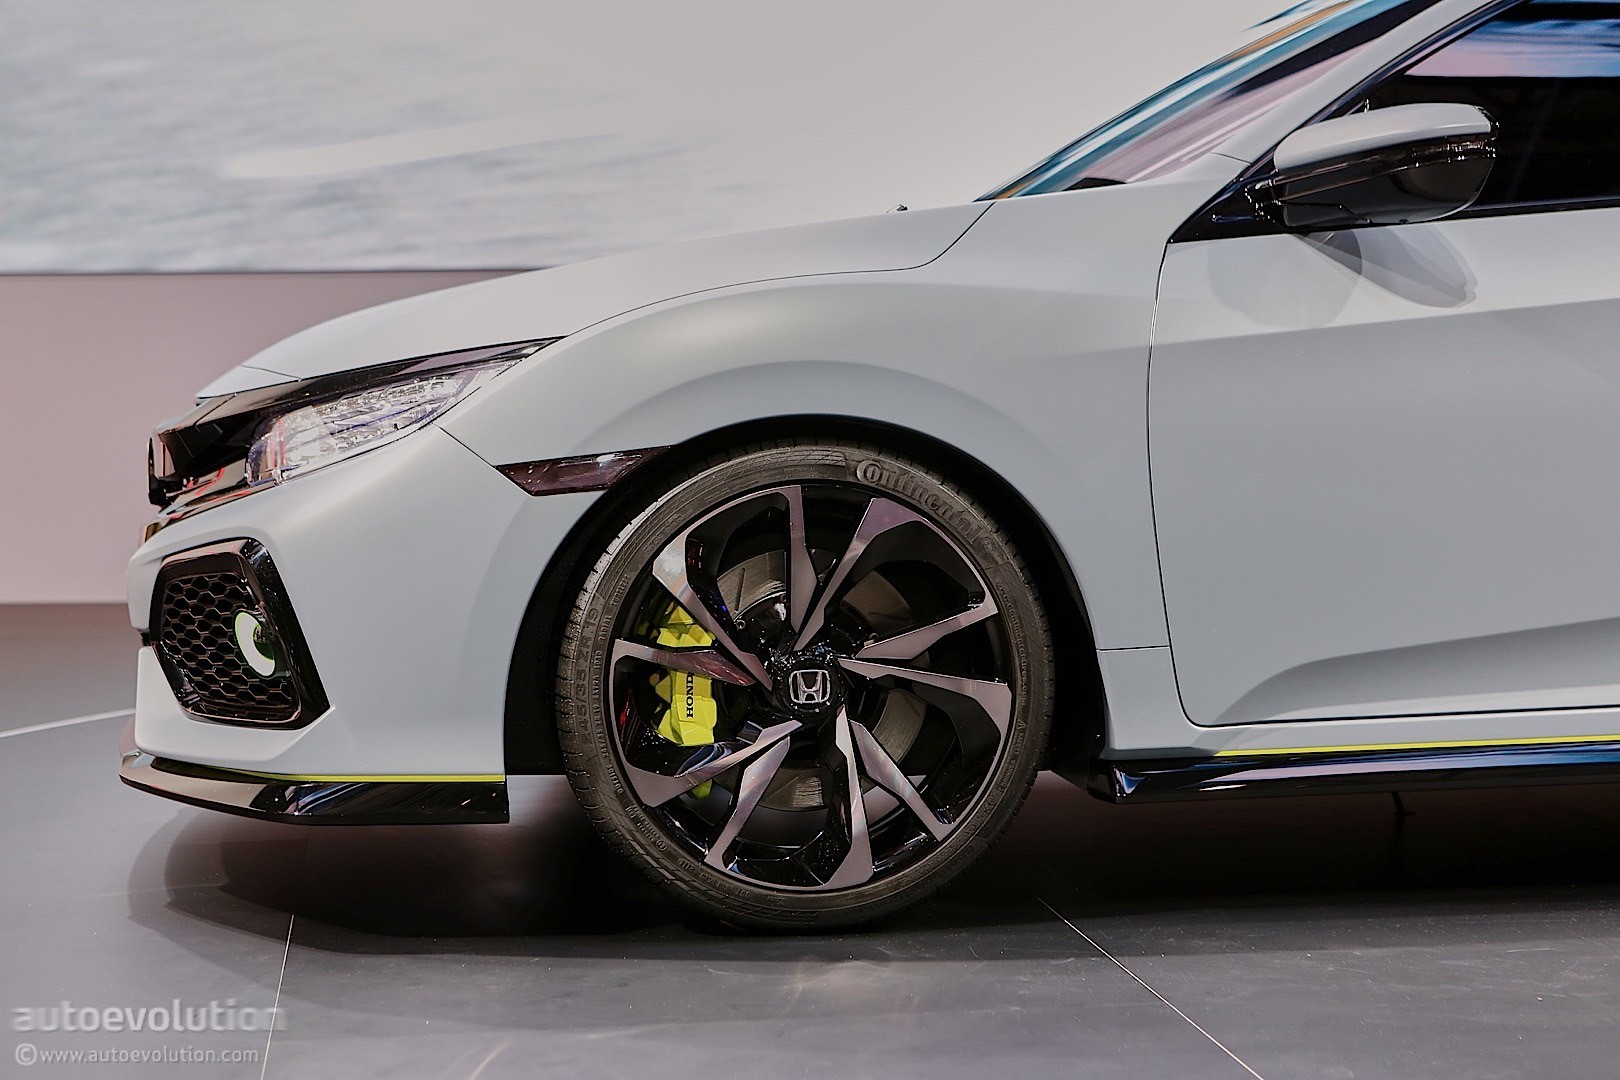 honda-civic-hatchback-coming-to-new-york-civic-si-and-new-type-r-in-2017_14.jpg